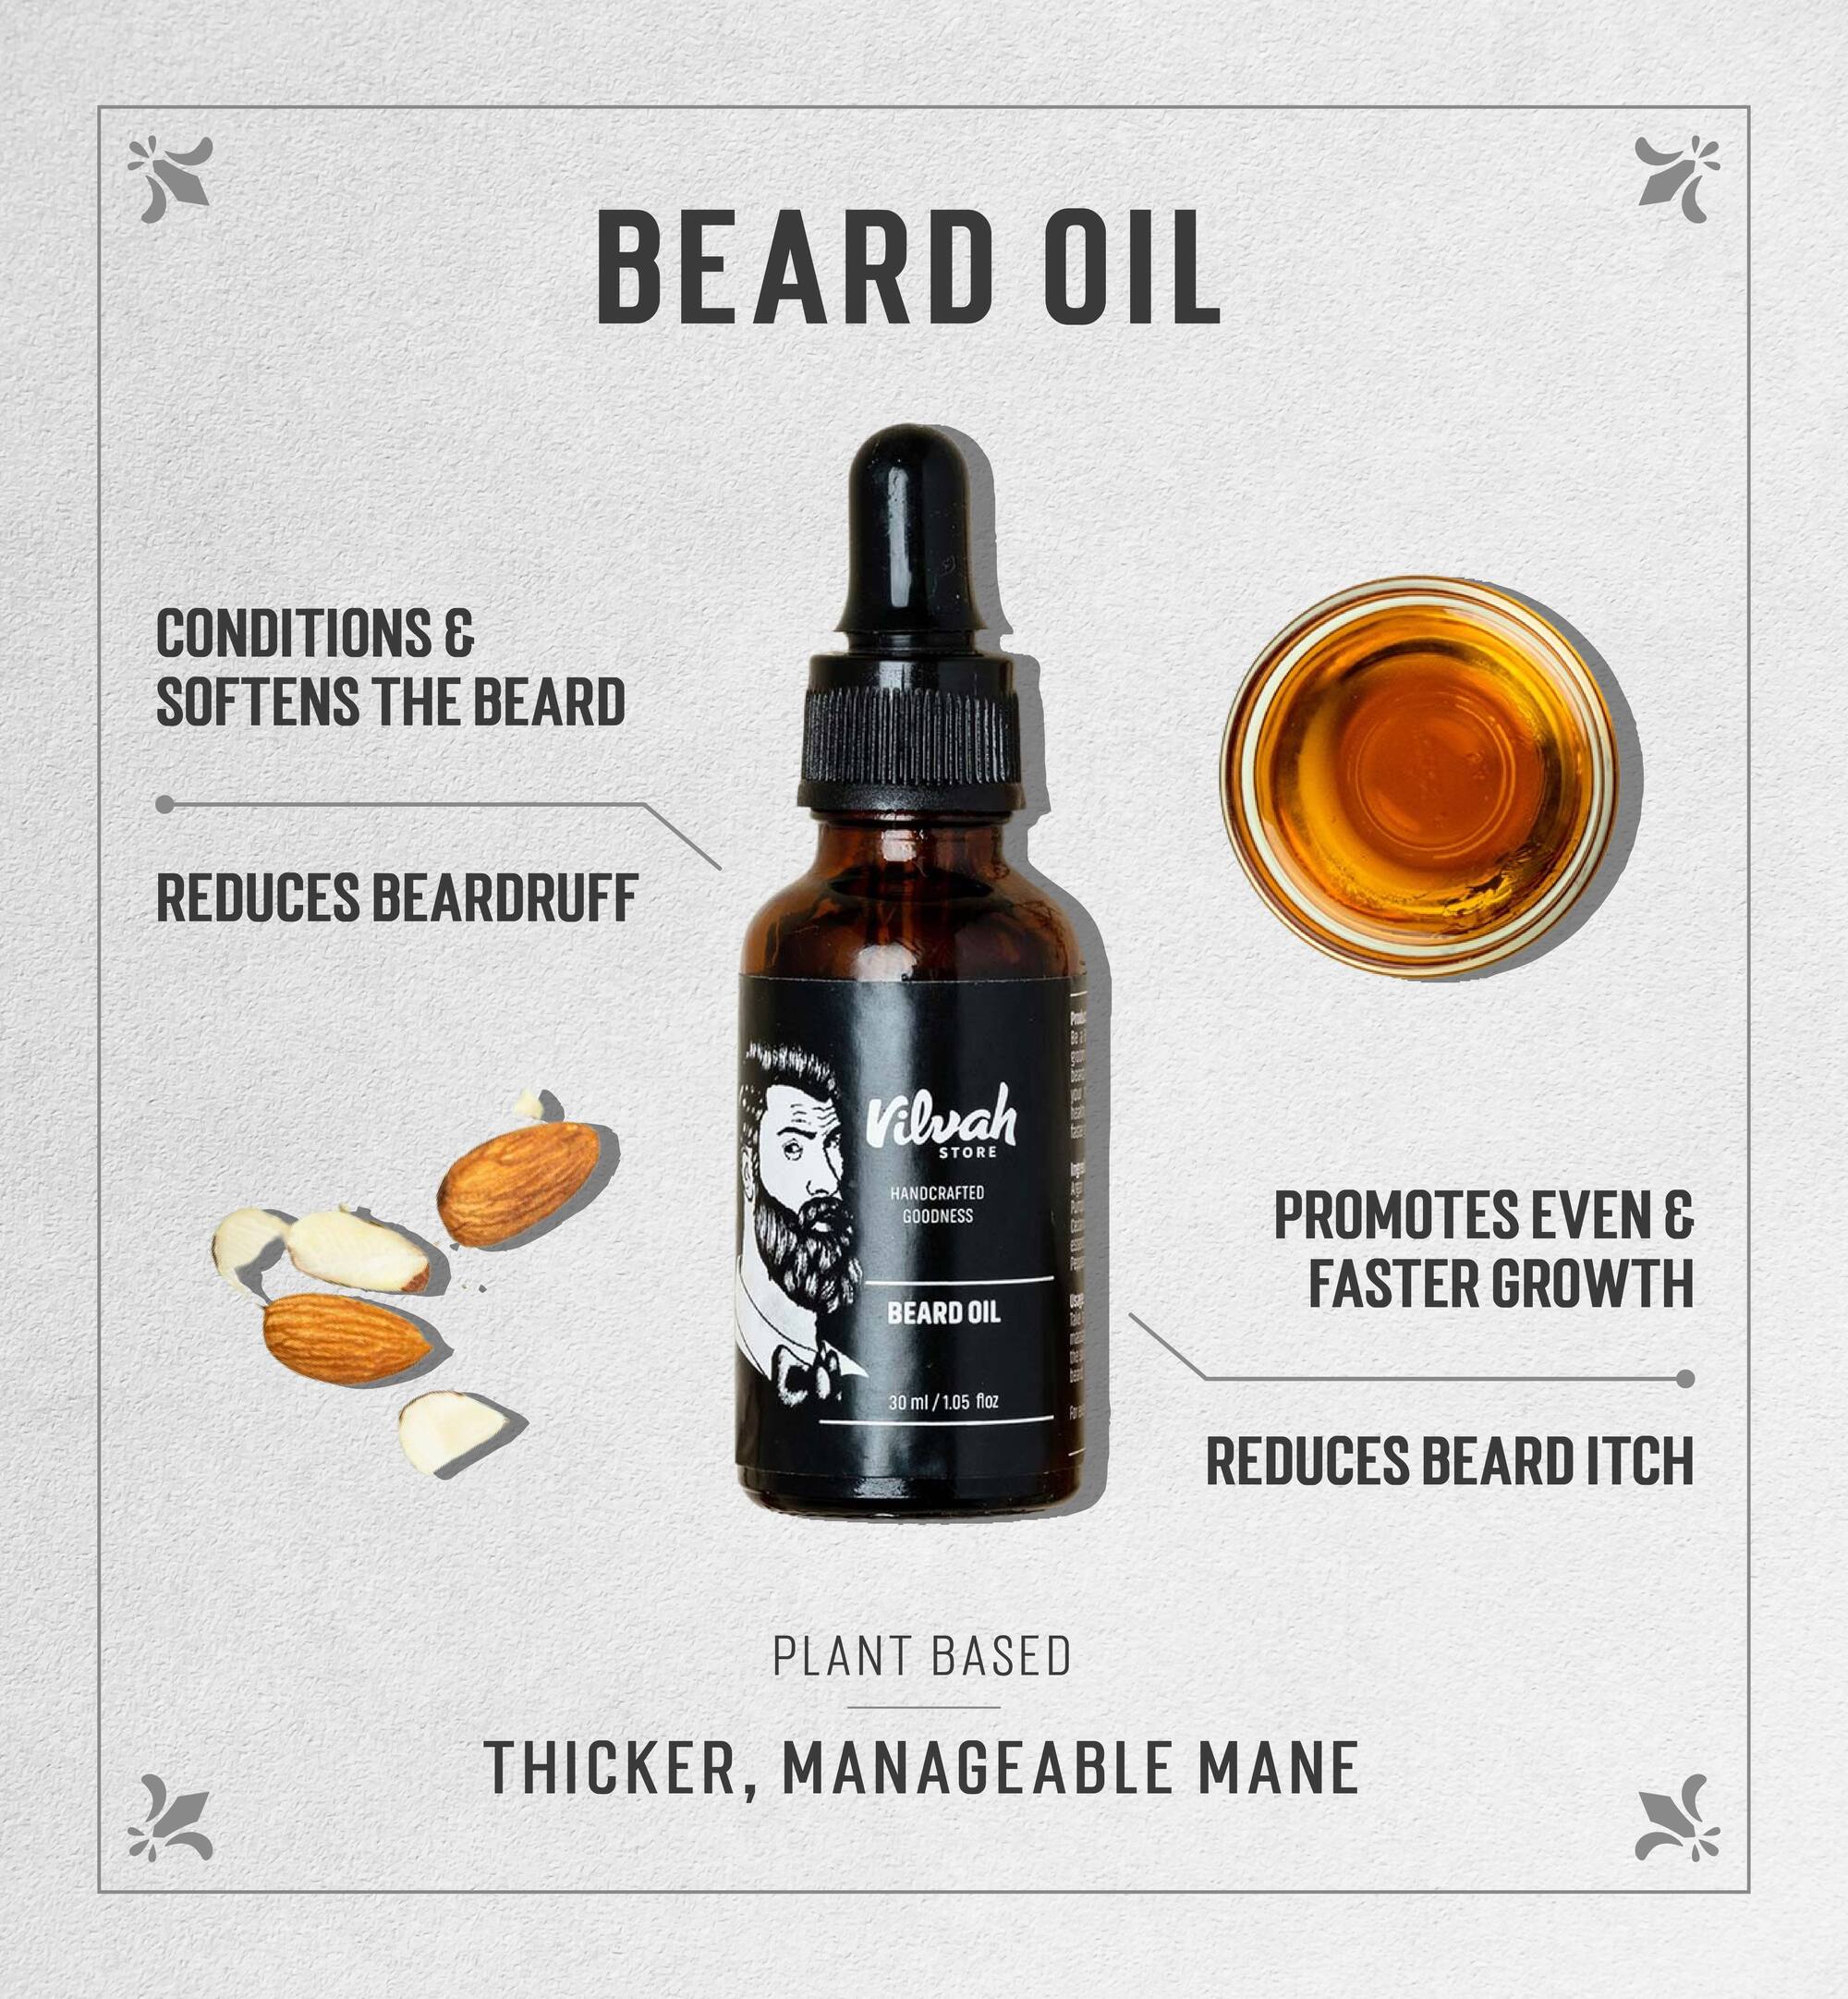 CONDITIONS SOFTENS THE BEARD REDUCES BEARDRUFF PROMOTES EVEN FASTER GROWTH * Bo mi 1.05 fez ys I Th "i F hy ae ; ie 7 ae 7s REDUCES BEARD ITCH PLANT BASED THICKER, MANAGEABLE MANE 